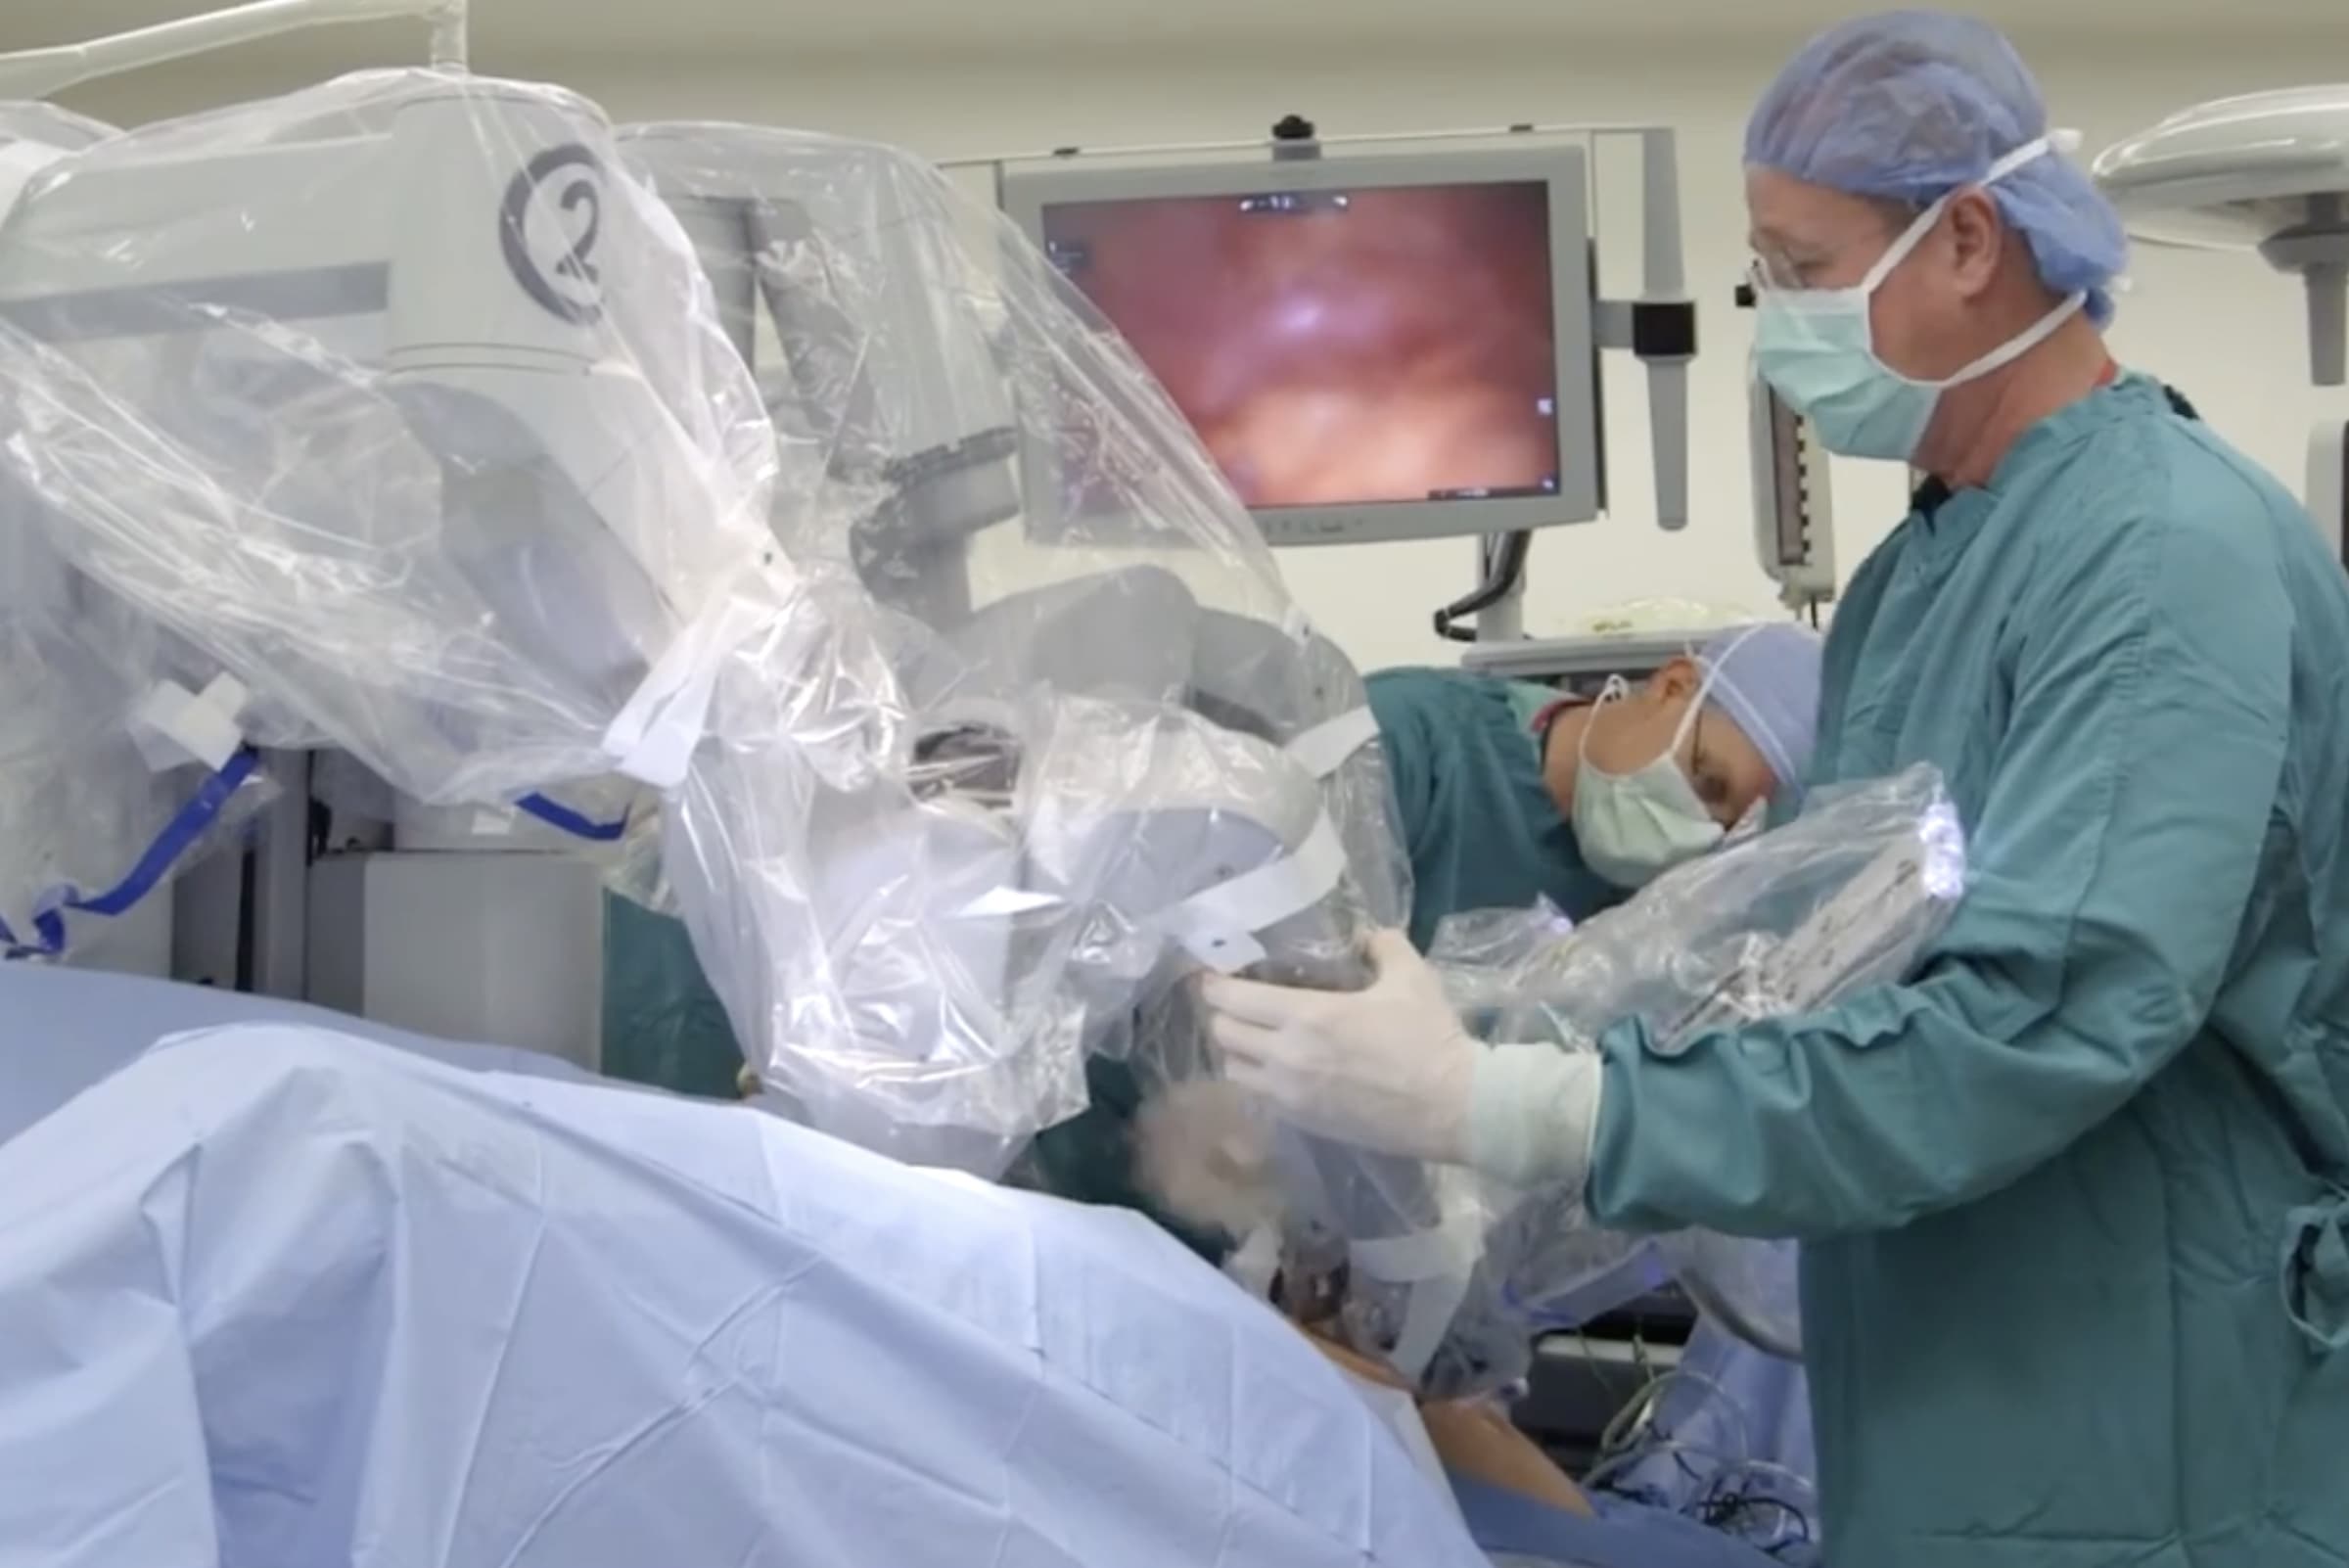 Dr. Mark Stowers preparing to perform a robotic surgery